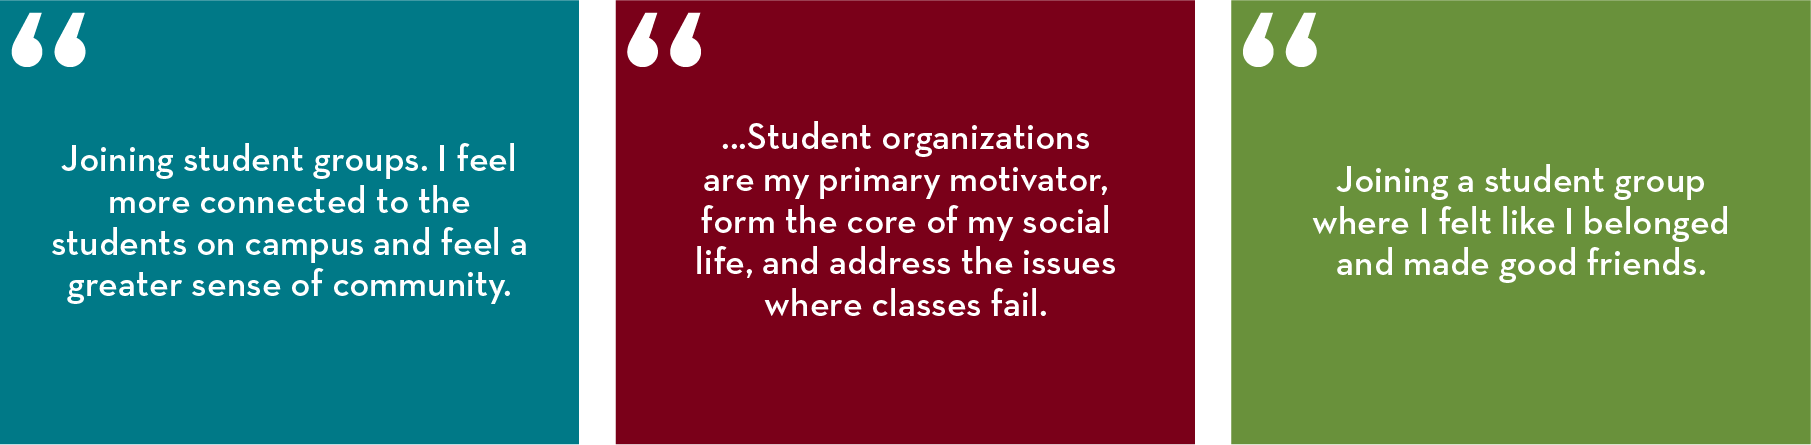 “Joining student groups. I feel more connected to the students on campus and feel a greater sense of community.” “...Student organizations are my primary motivator, form the core of my social life, and address the issues where classes fail.” “Joining a st